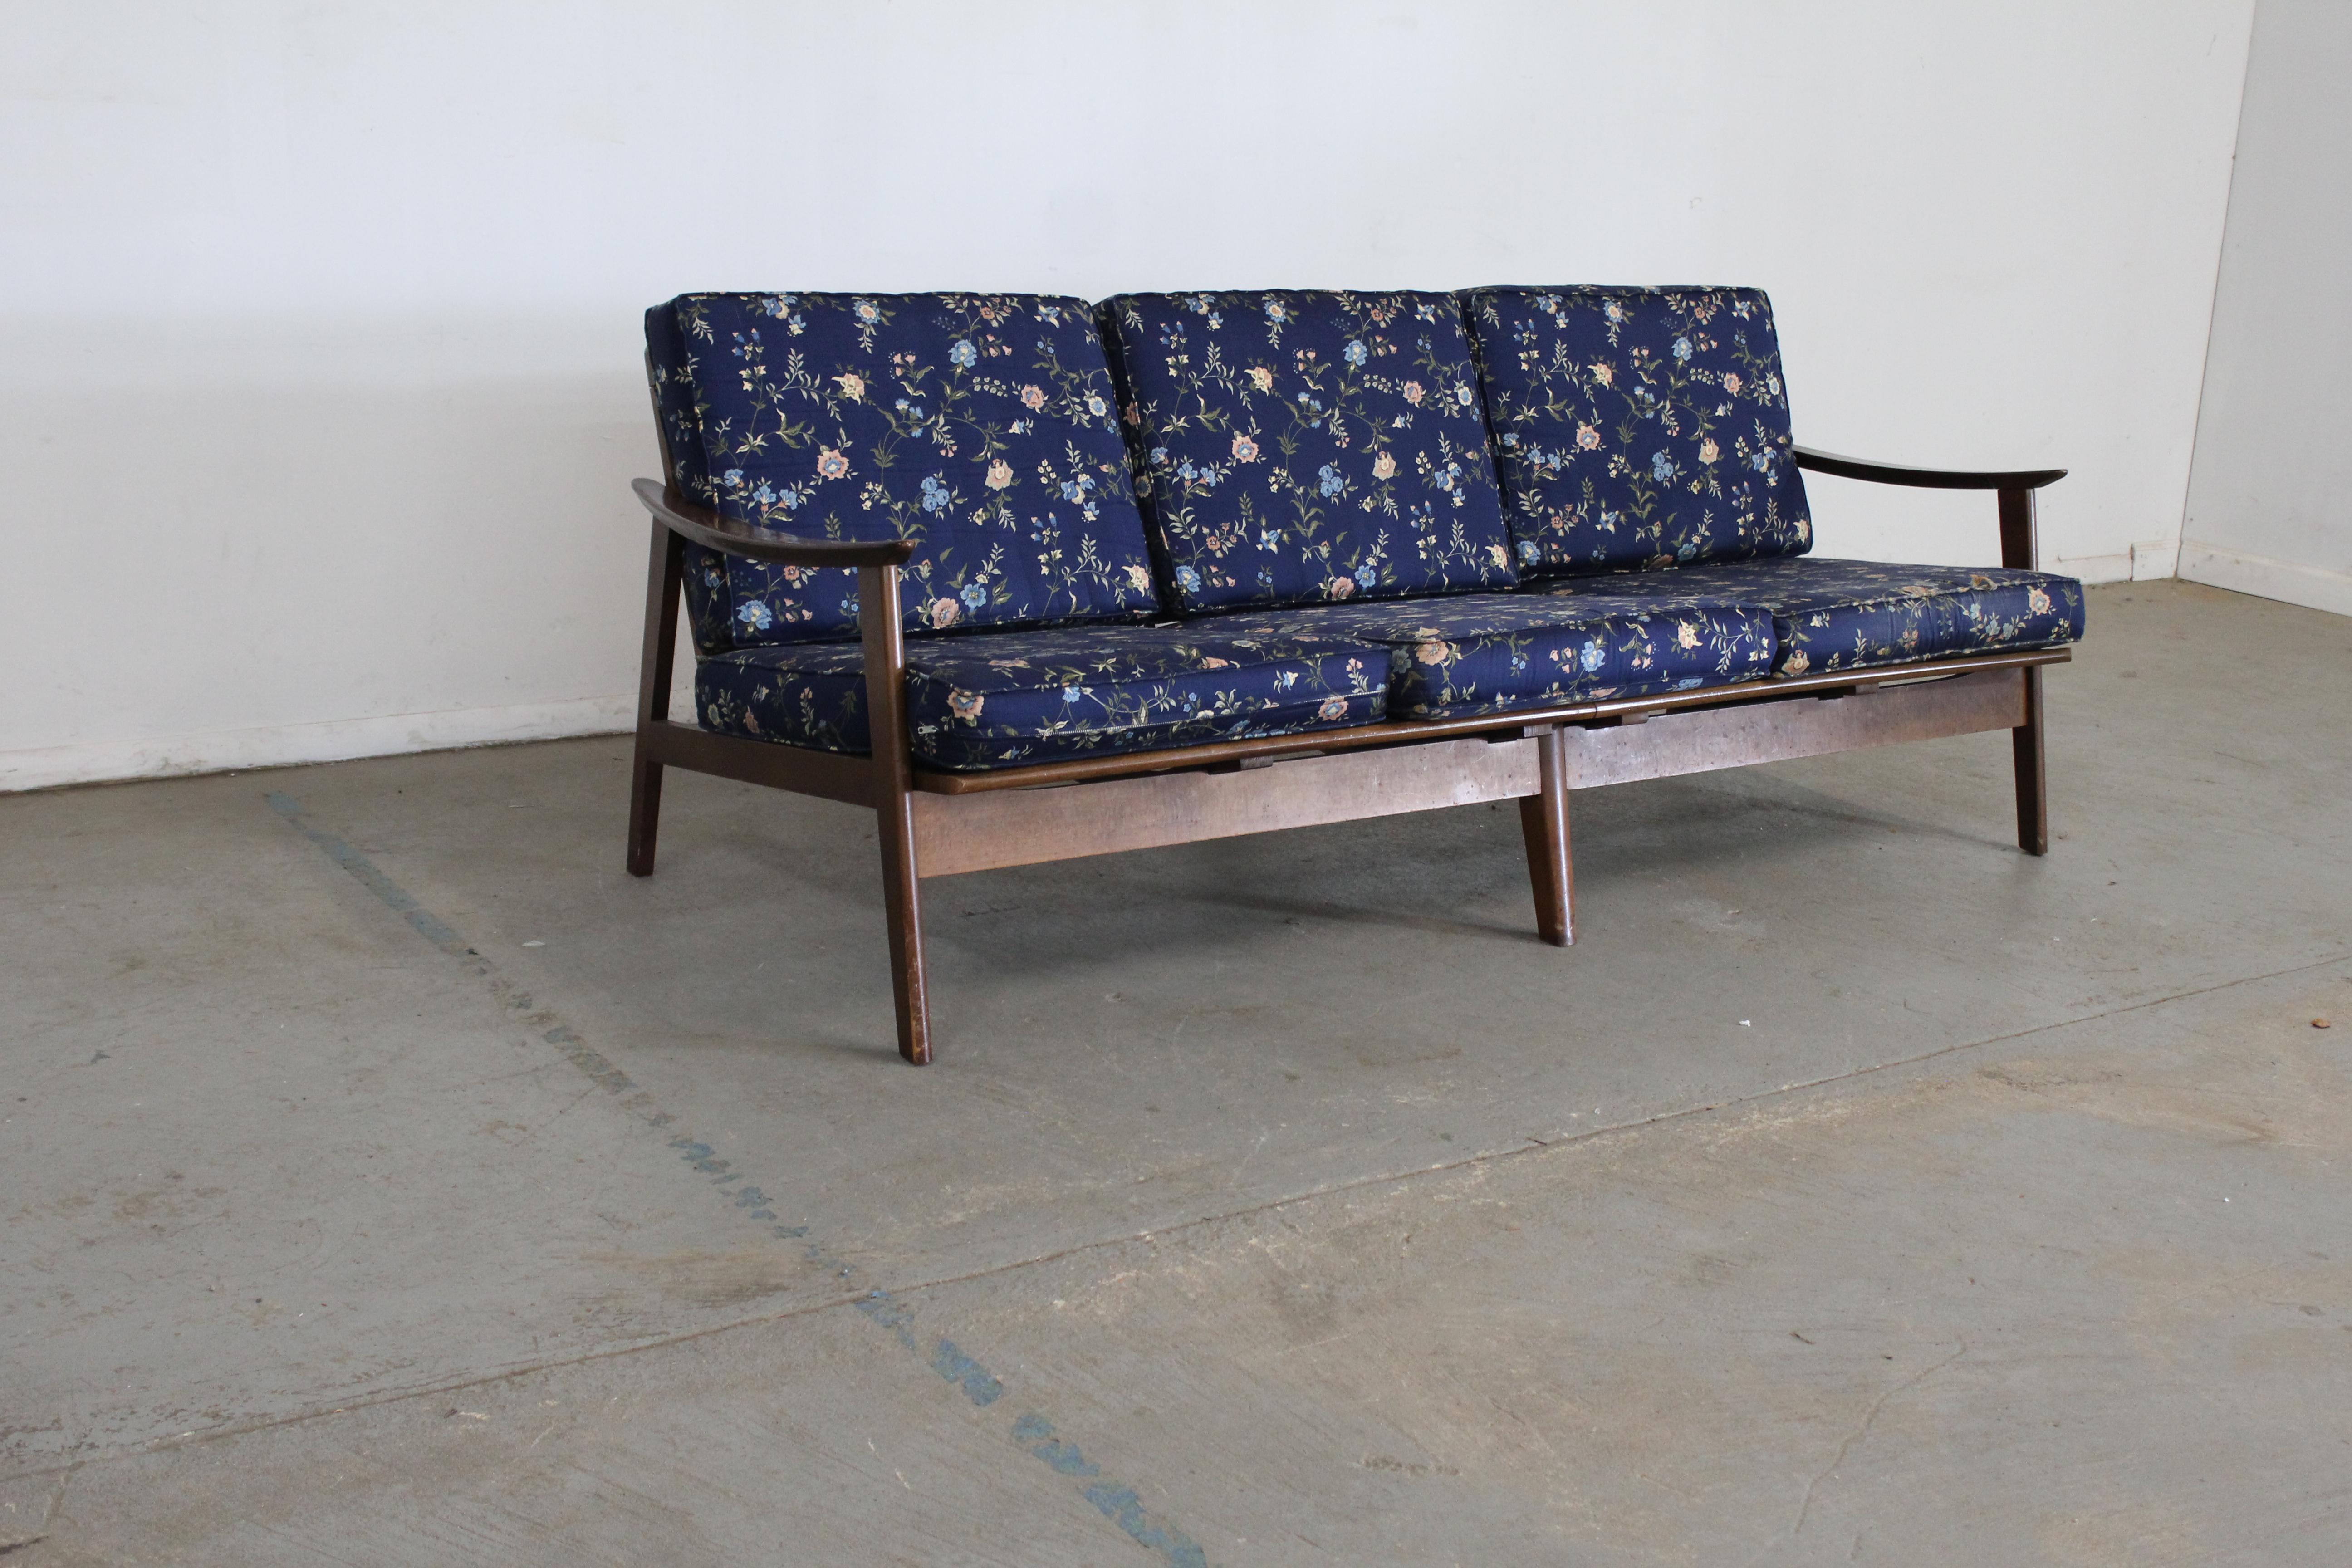 Mid-Century Modern 3 Cushion Open Arm Walnut Sofa
Offered is a unrestored original mid-century modern sofa.  The sofa features a wonderful and stylish Walnut frame.  The splayed legs legs are accentuated by the Banana Style arms. The piece is design